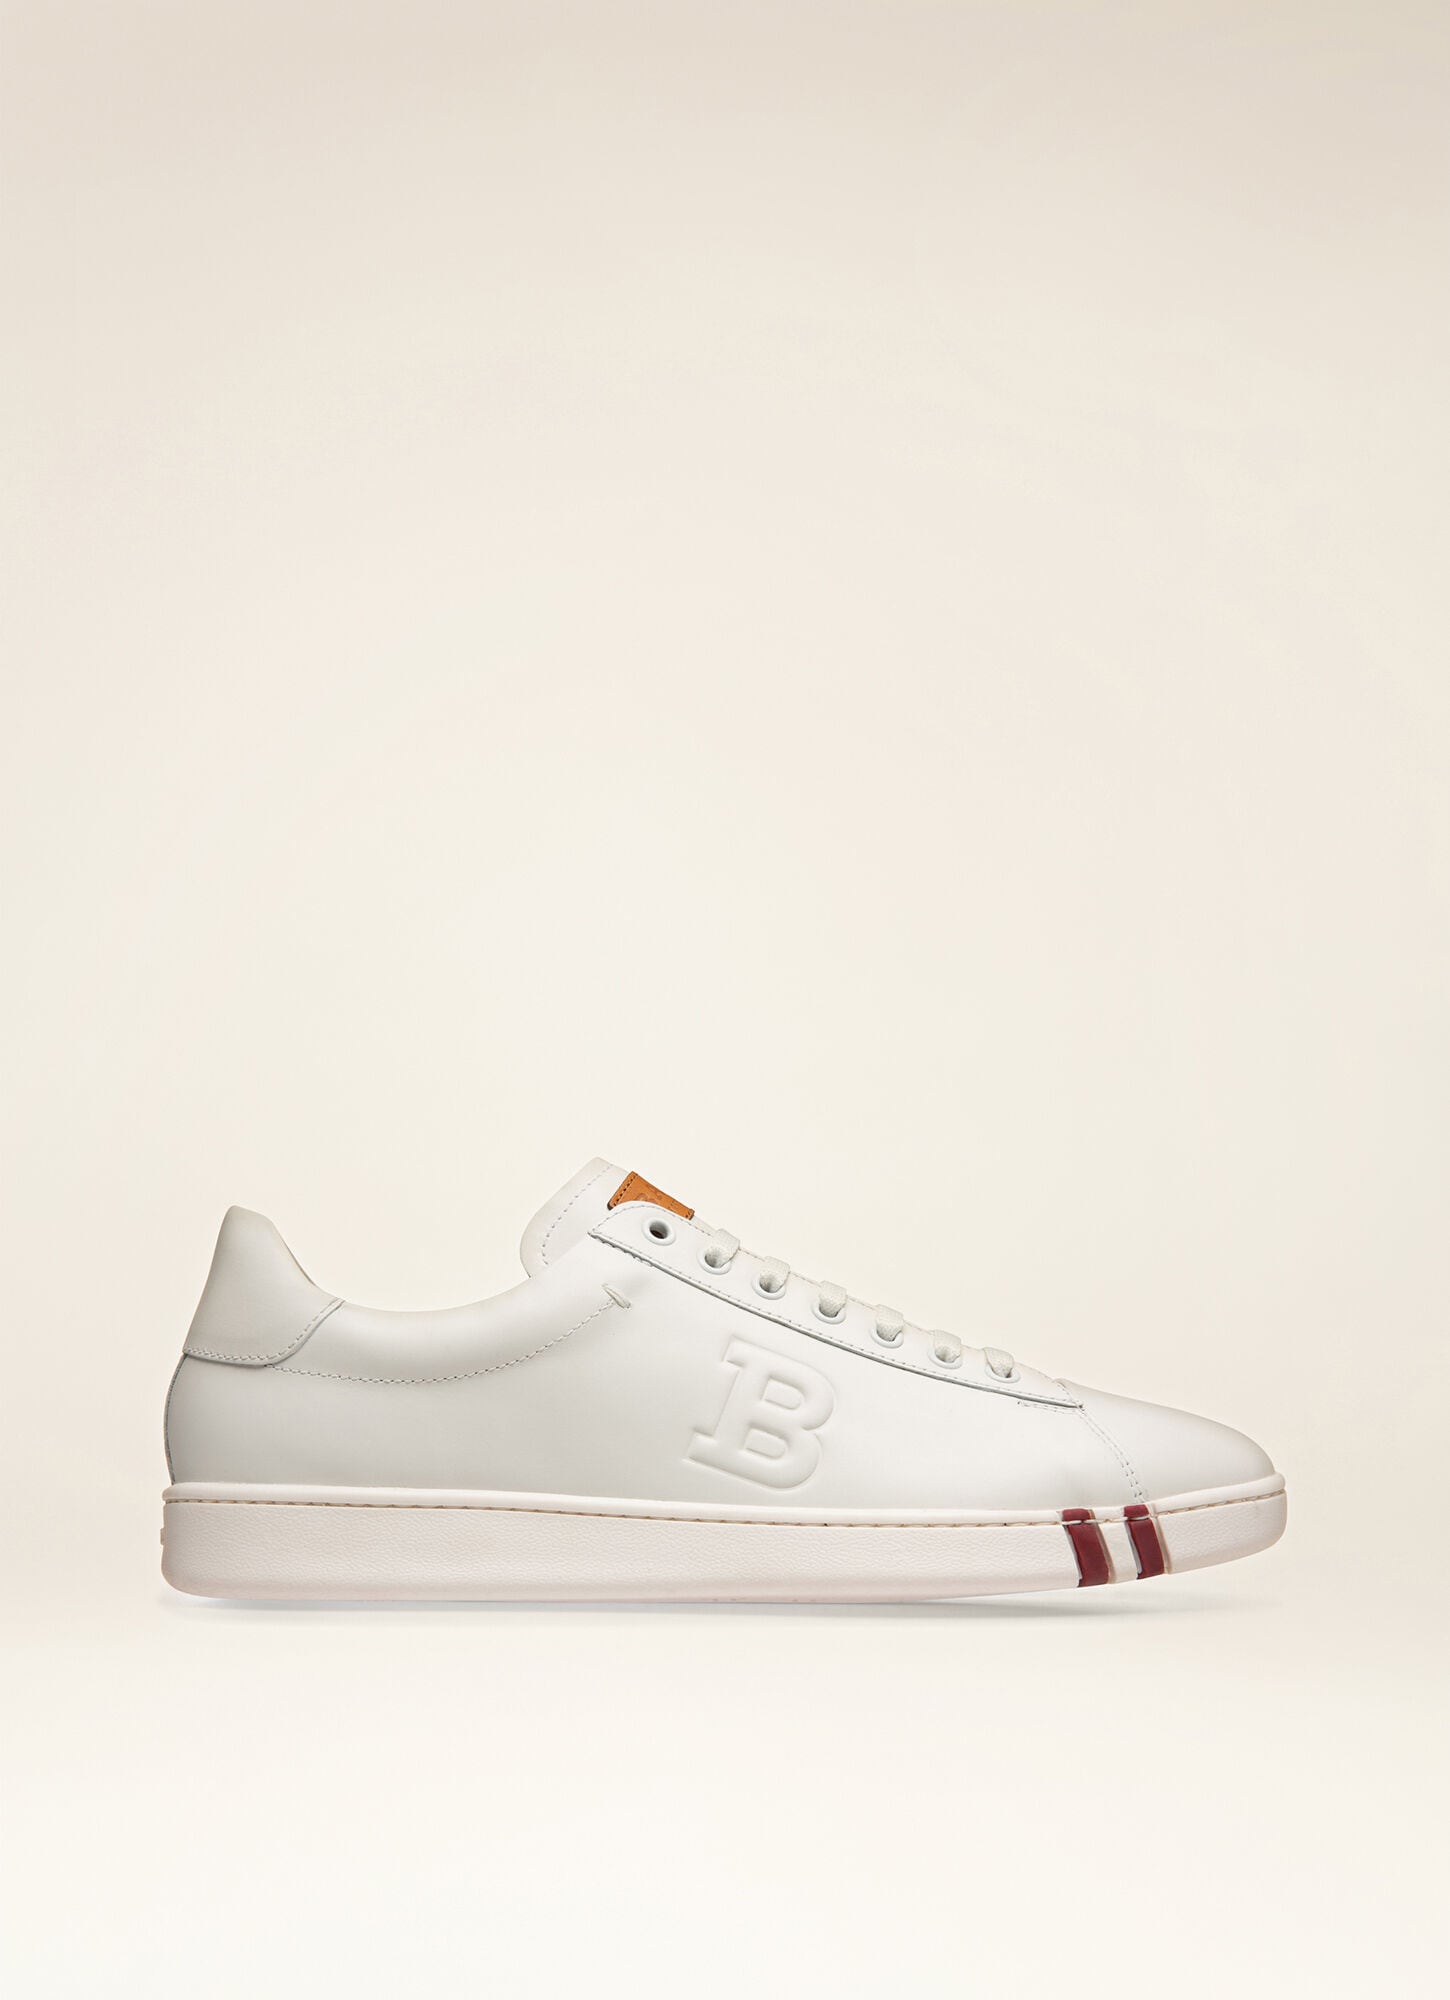 ASHER | Men's Trainers | Bally Shoes